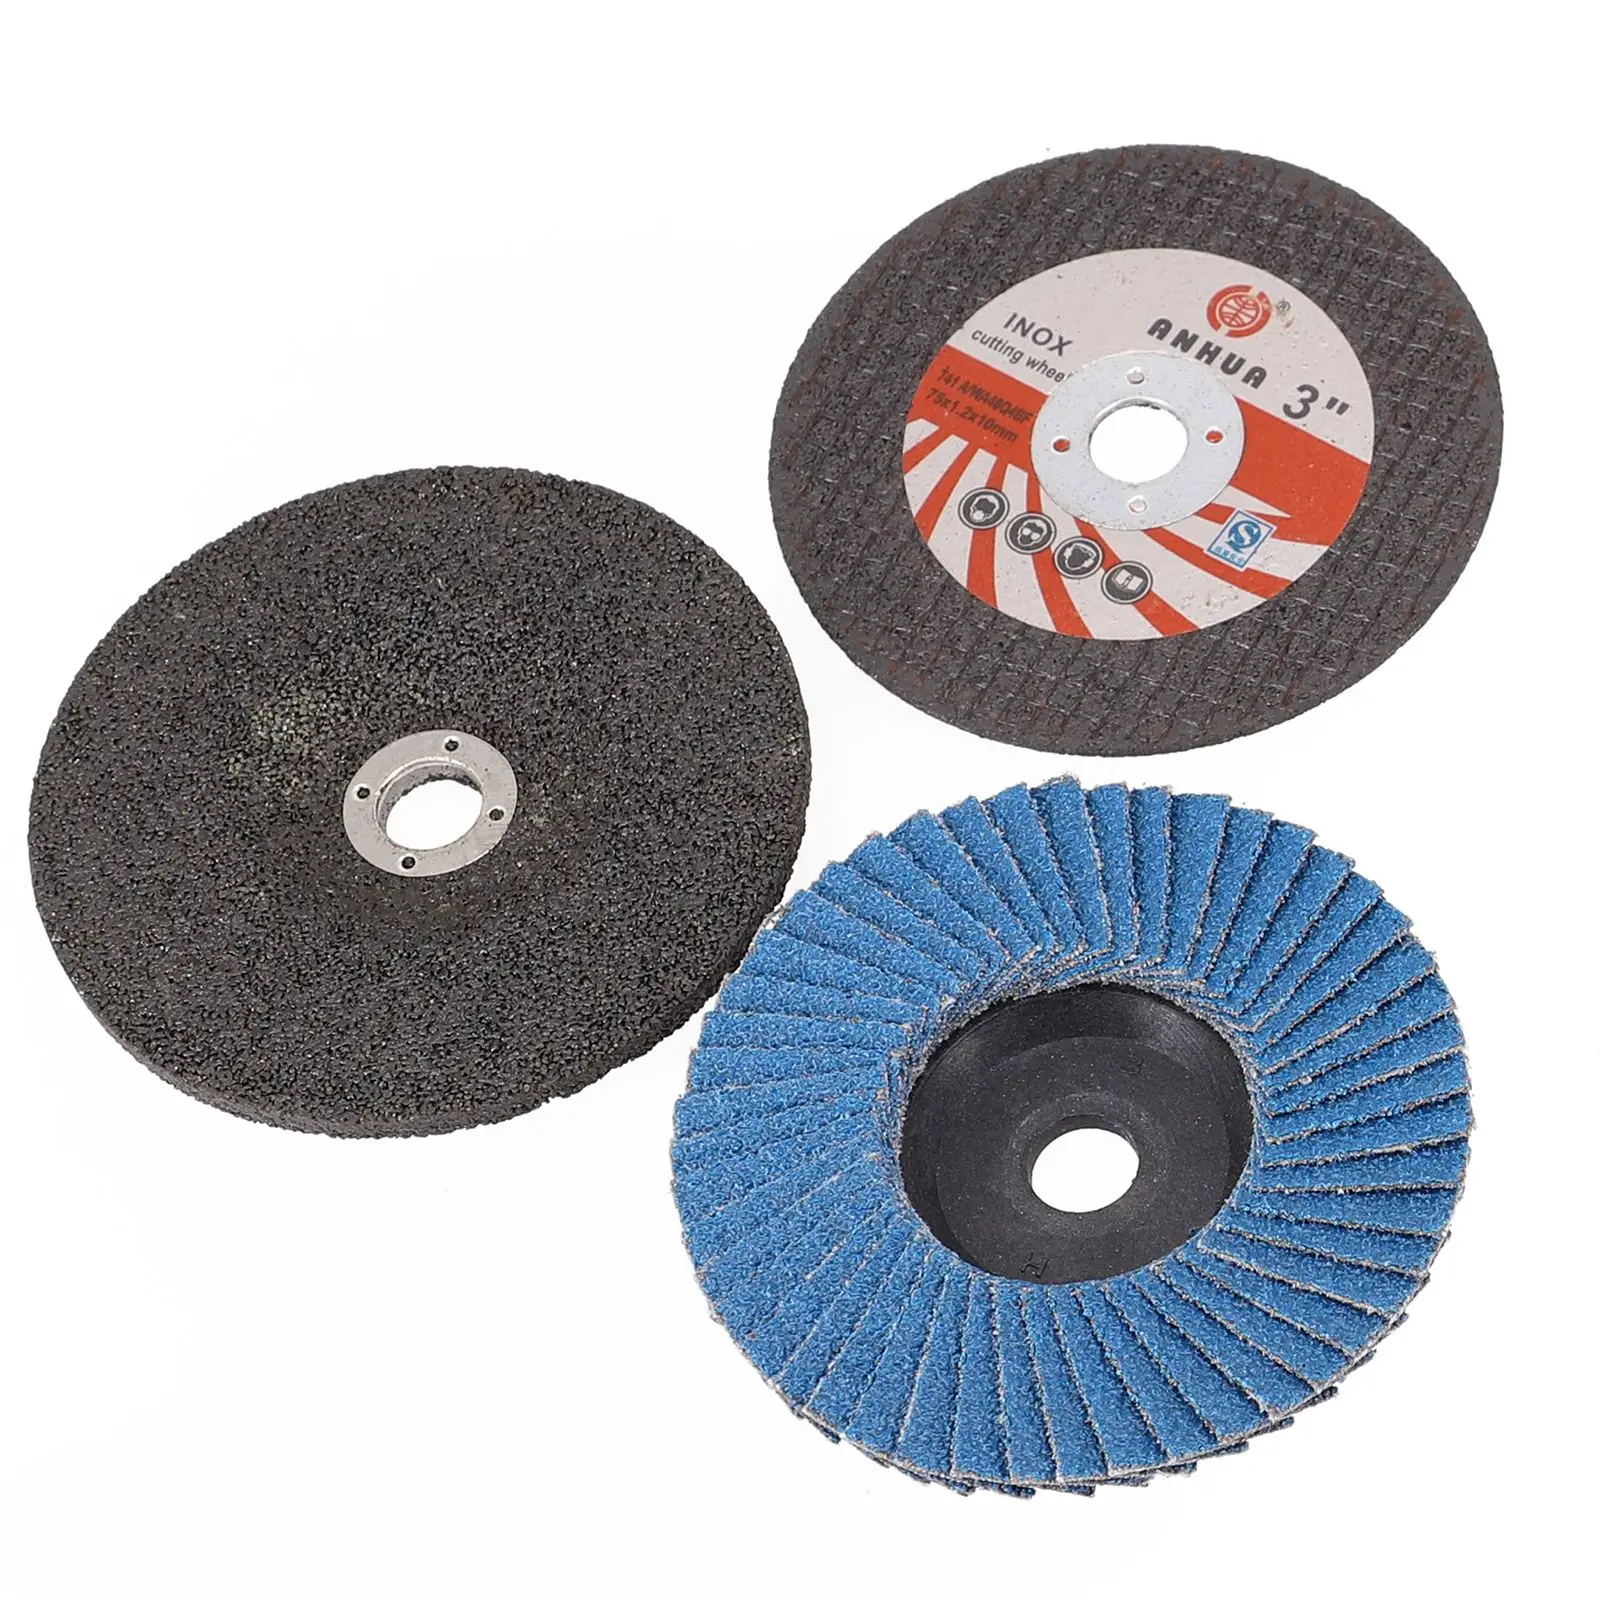 Brand New Cutting Disc Grinding Wheel Circular Saw Blade For Angle Grinder For Ceramic Tile Wood Polishing Disc 4 wood carving disc cut chain saw blade 22 teeth fine chainsaw set wood cutting disc for 100 115 angle grinder disc accessories